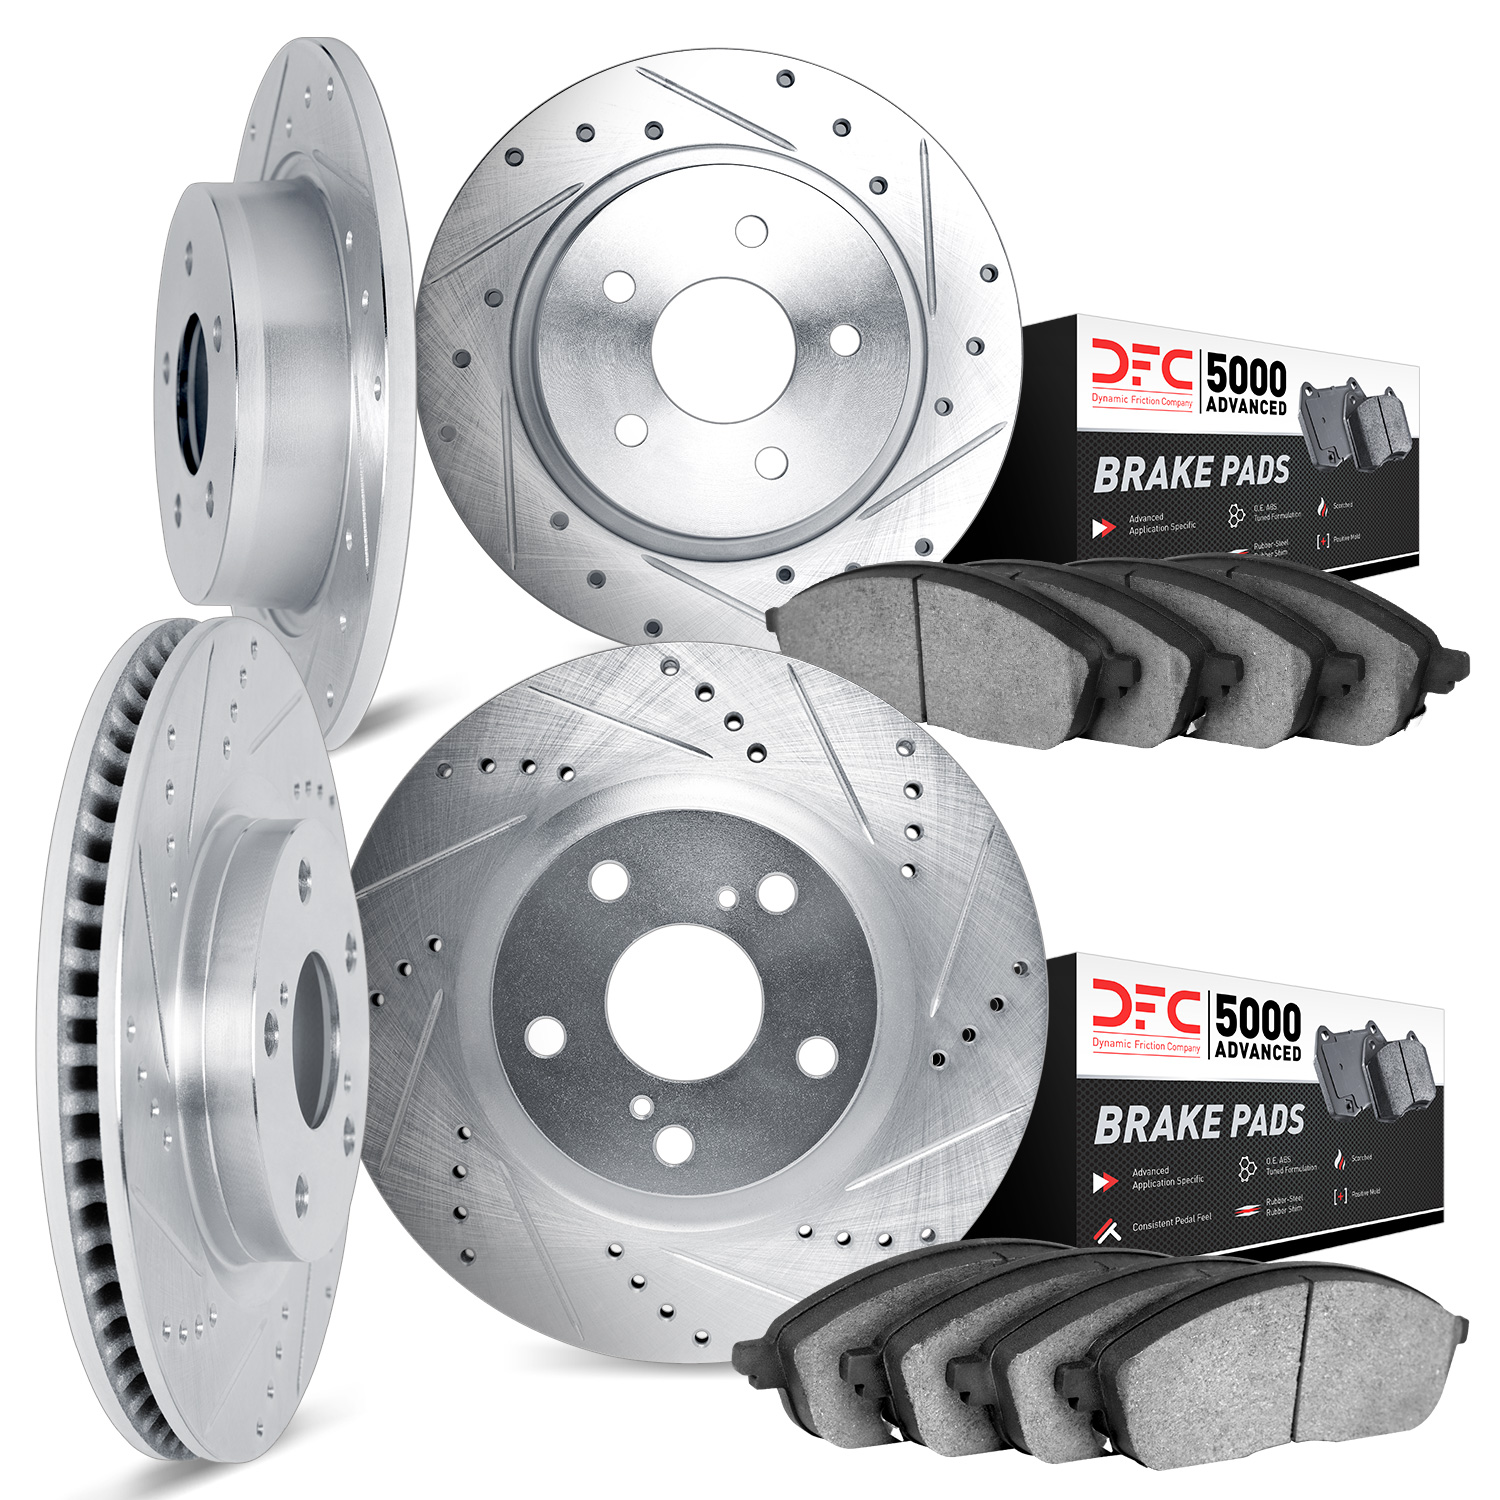 7504-74067 Drilled/Slotted Brake Rotors w/5000 Advanced Brake Pads Kit [Silver], 2005-2010 Audi/Volkswagen, Position: Front and